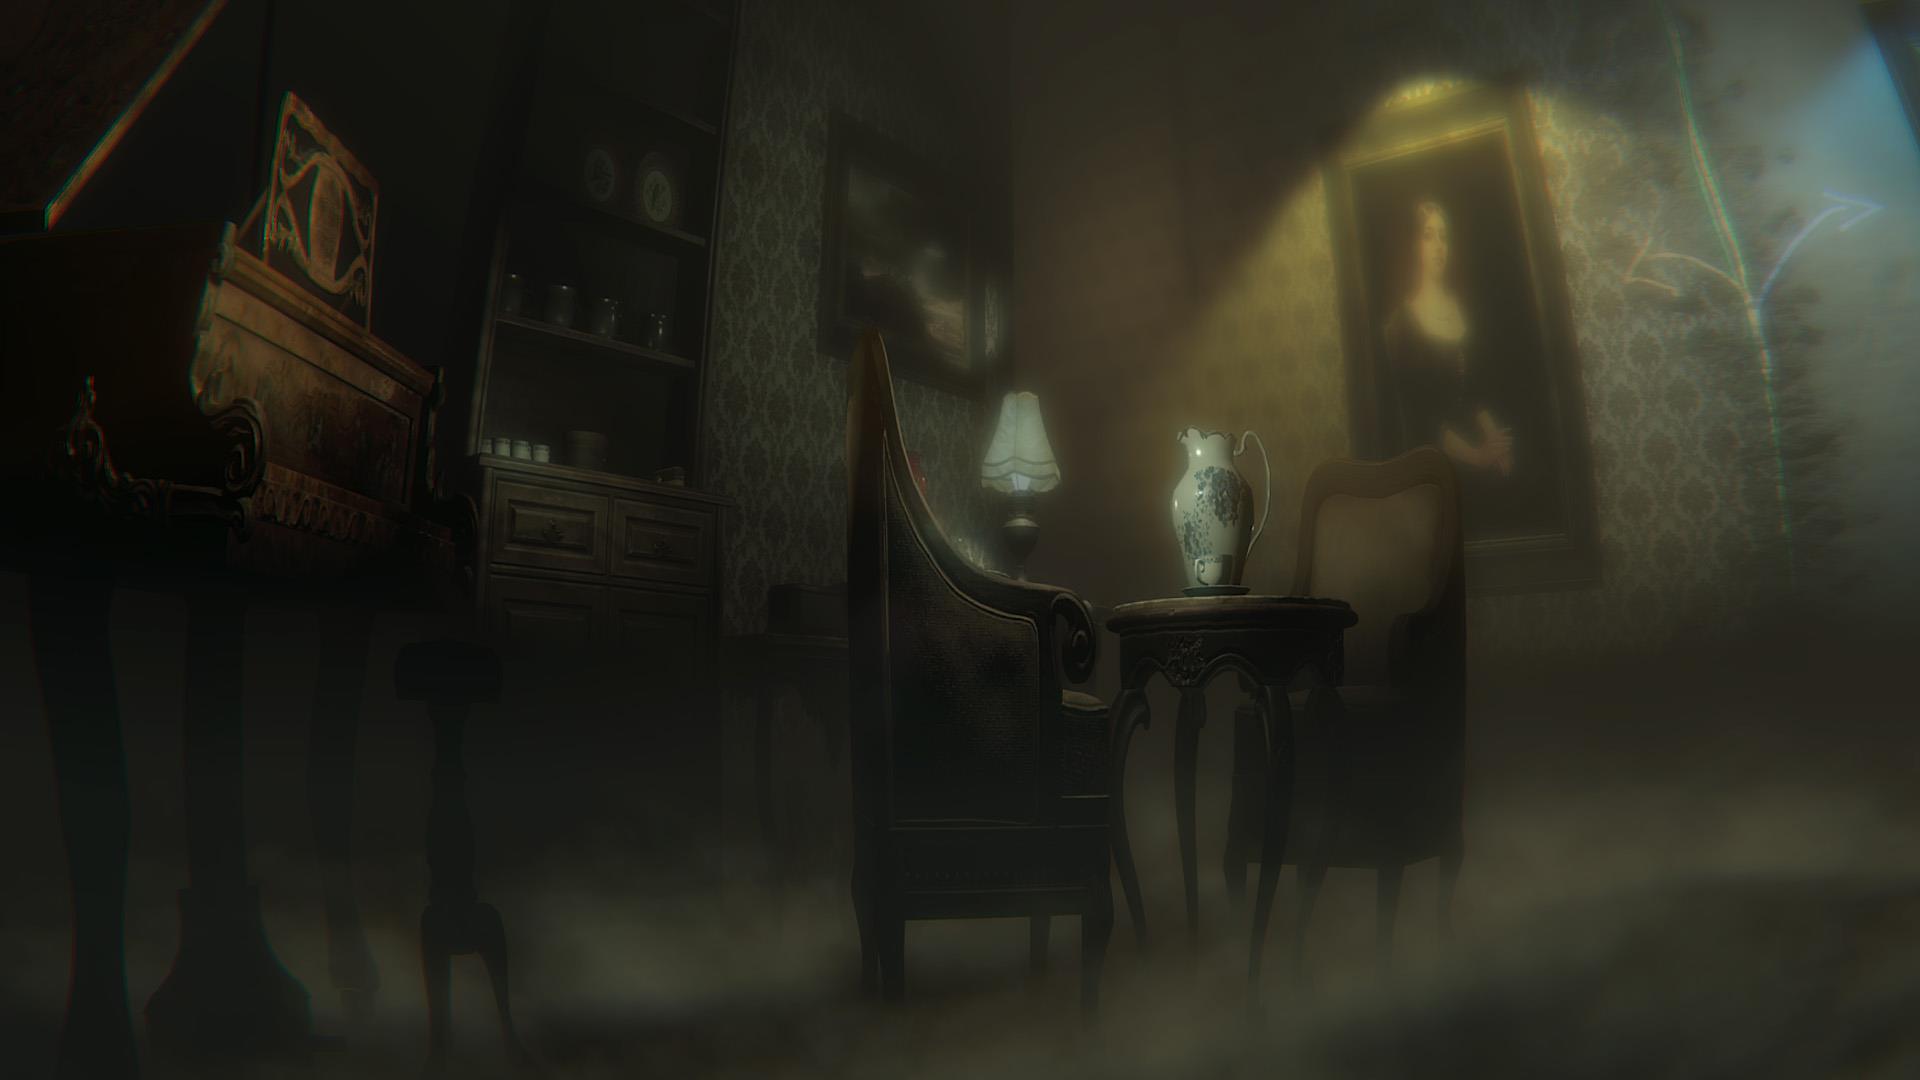 Layers of Fear: Legacy - Christmas trailer 